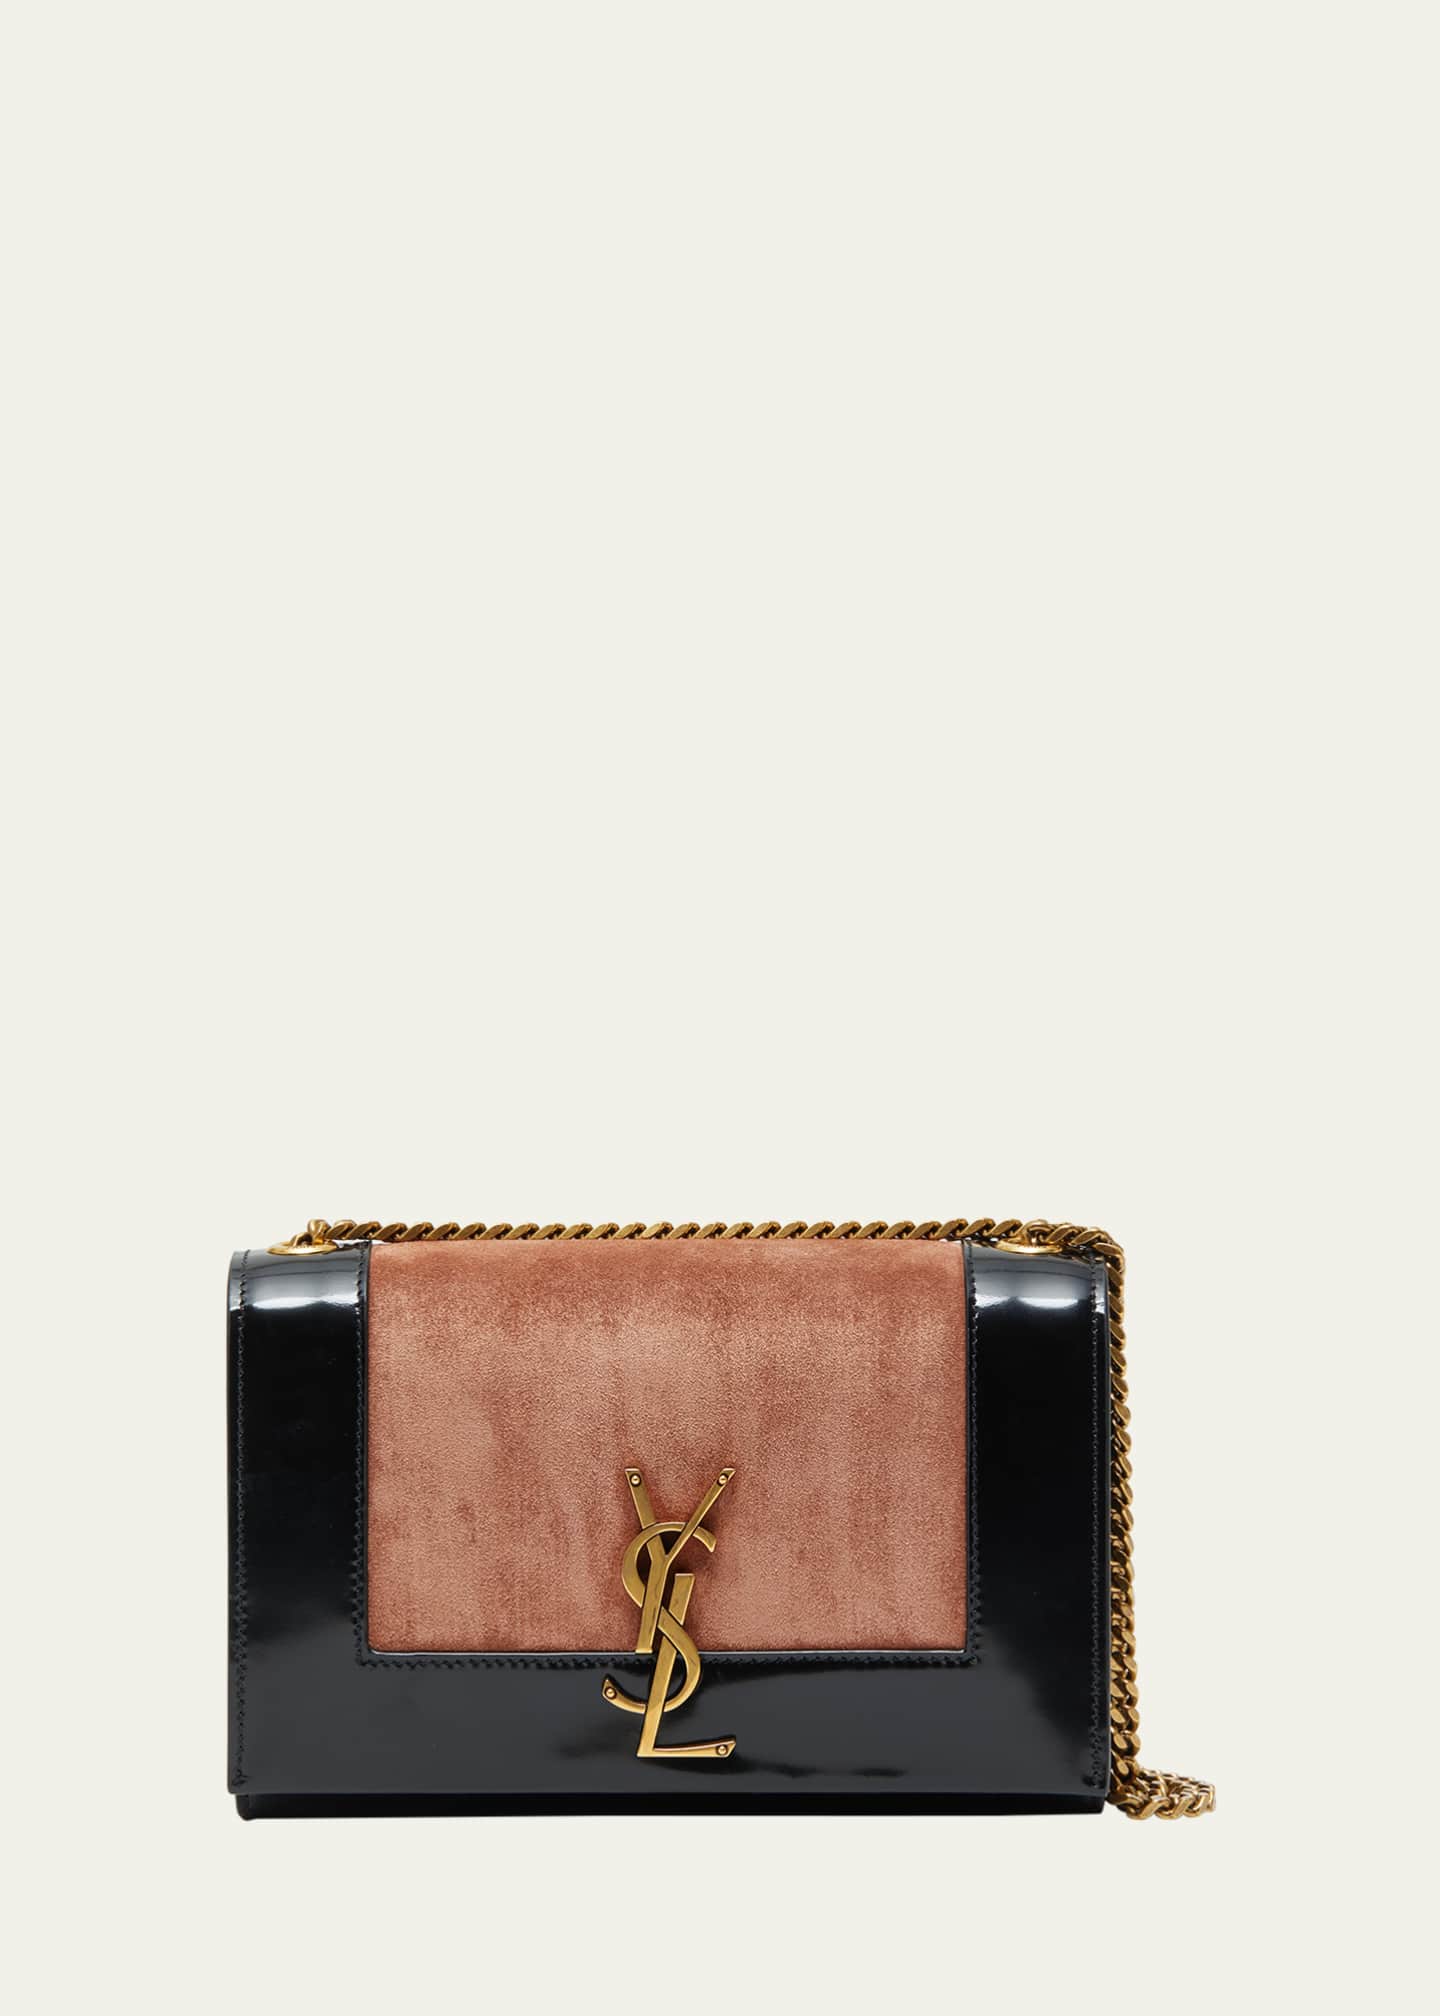 SUNSET small in suede, Saint Laurent